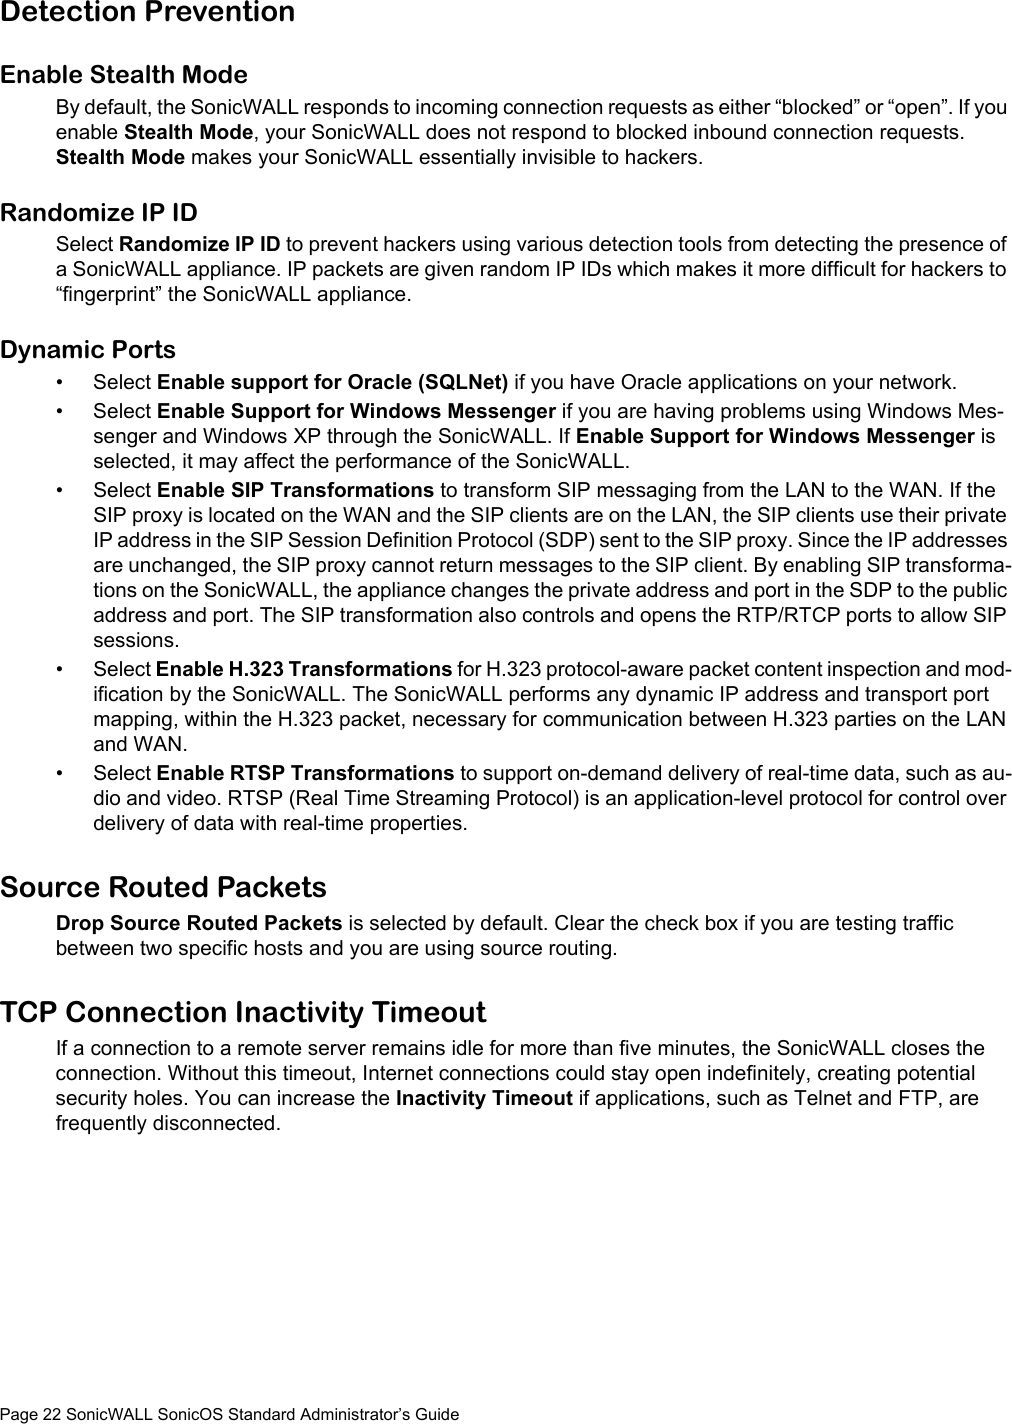 Page 22 SonicWALL SonicOS Standard Administrator’s GuideDetection PreventionEnable Stealth ModeBy default, the SonicWALL responds to incoming connection requests as either “blocked” or “open”. If you enable Stealth Mode, your SonicWALL does not respond to blocked inbound connection requests. Stealth Mode makes your SonicWALL essentially invisible to hackers.Randomize IP IDSelect Randomize IP ID to prevent hackers using various detection tools from detecting the presence of a SonicWALL appliance. IP packets are given random IP IDs which makes it more difficult for hackers to “fingerprint” the SonicWALL appliance. Dynamic Ports•Select Enable support for Oracle (SQLNet) if you have Oracle applications on your network. •Select Enable Support for Windows Messenger if you are having problems using Windows Mes-senger and Windows XP through the SonicWALL. If Enable Support for Windows Messenger is selected, it may affect the performance of the SonicWALL. •Select Enable SIP Transformations to transform SIP messaging from the LAN to the WAN. If the SIP proxy is located on the WAN and the SIP clients are on the LAN, the SIP clients use their private IP address in the SIP Session Definition Protocol (SDP) sent to the SIP proxy. Since the IP addresses are unchanged, the SIP proxy cannot return messages to the SIP client. By enabling SIP transforma-tions on the SonicWALL, the appliance changes the private address and port in the SDP to the public address and port. The SIP transformation also controls and opens the RTP/RTCP ports to allow SIP sessions. •Select Enable H.323 Transformations for H.323 protocol-aware packet content inspection and mod-ification by the SonicWALL. The SonicWALL performs any dynamic IP address and transport port mapping, within the H.323 packet, necessary for communication between H.323 parties on the LAN and WAN. •Select Enable RTSP Transformations to support on-demand delivery of real-time data, such as au-dio and video. RTSP (Real Time Streaming Protocol) is an application-level protocol for control over delivery of data with real-time properties. Source Routed PacketsDrop Source Routed Packets is selected by default. Clear the check box if you are testing traffic between two specific hosts and you are using source routing.TCP Connection Inactivity TimeoutIf a connection to a remote server remains idle for more than five minutes, the SonicWALL closes the connection. Without this timeout, Internet connections could stay open indefinitely, creating potential security holes. You can increase the Inactivity Timeout if applications, such as Telnet and FTP, are frequently disconnected.